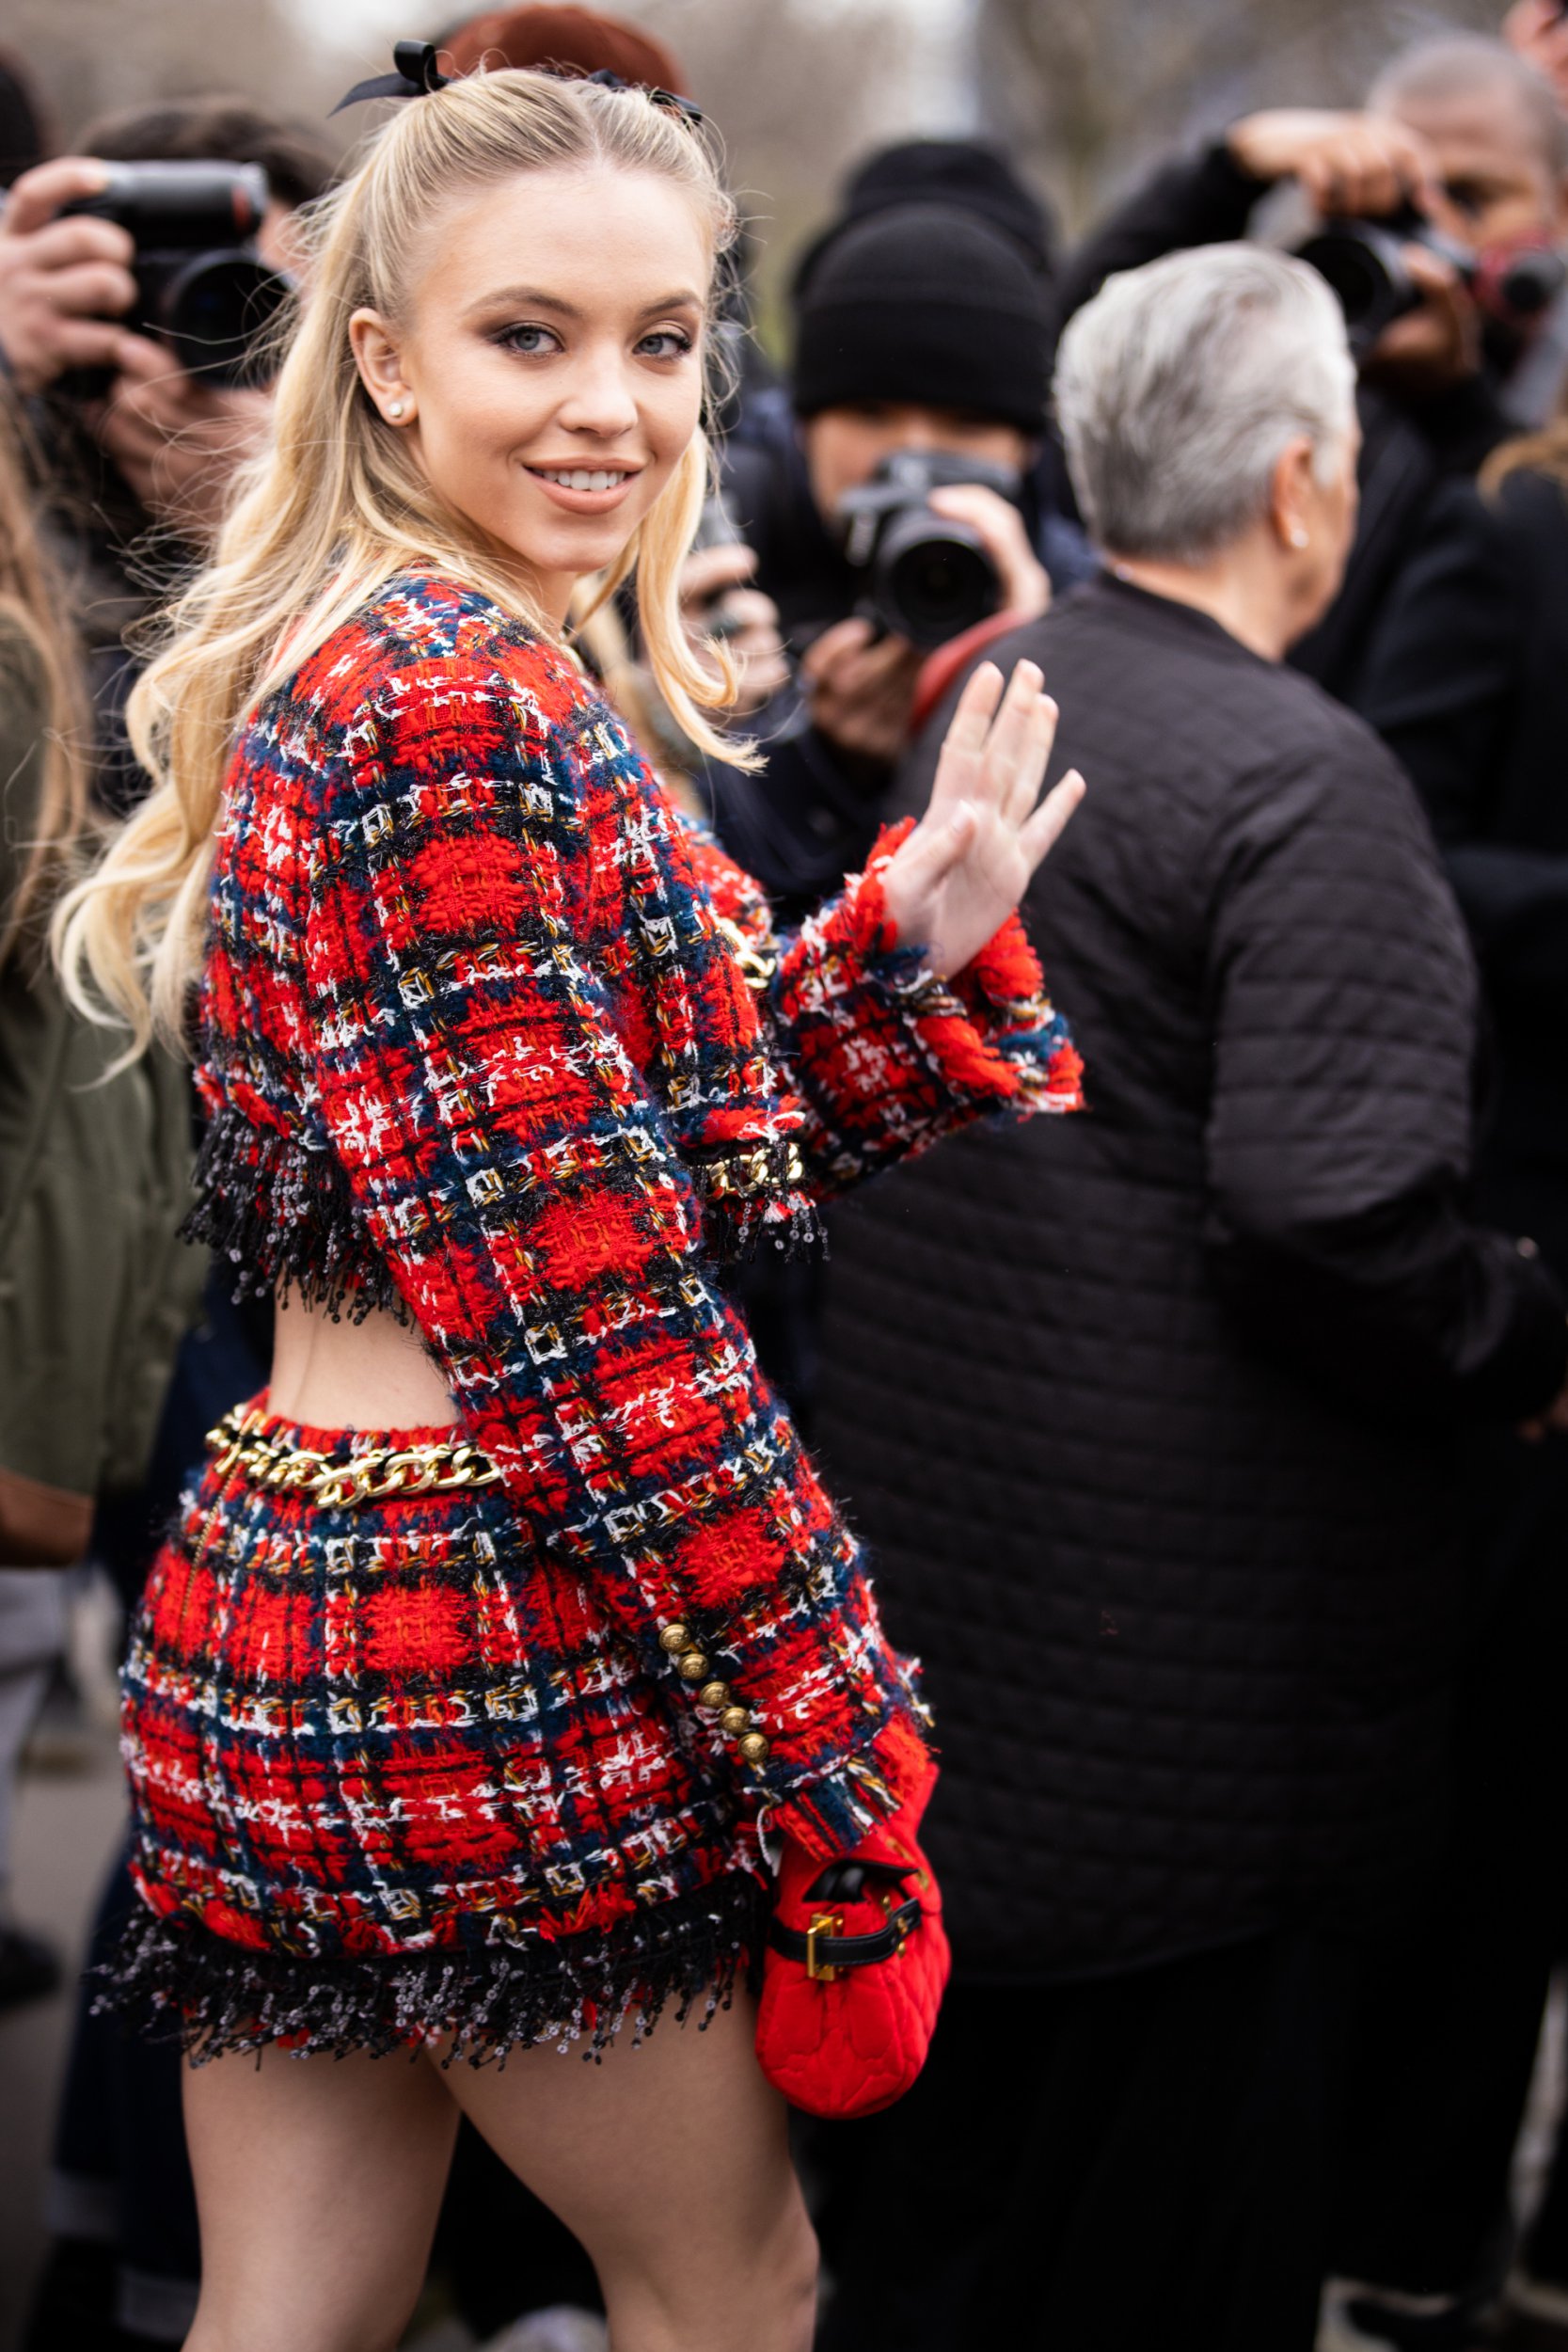 Sydney Sweeney was first spotted with a diamond ring on her left hand in February 2022